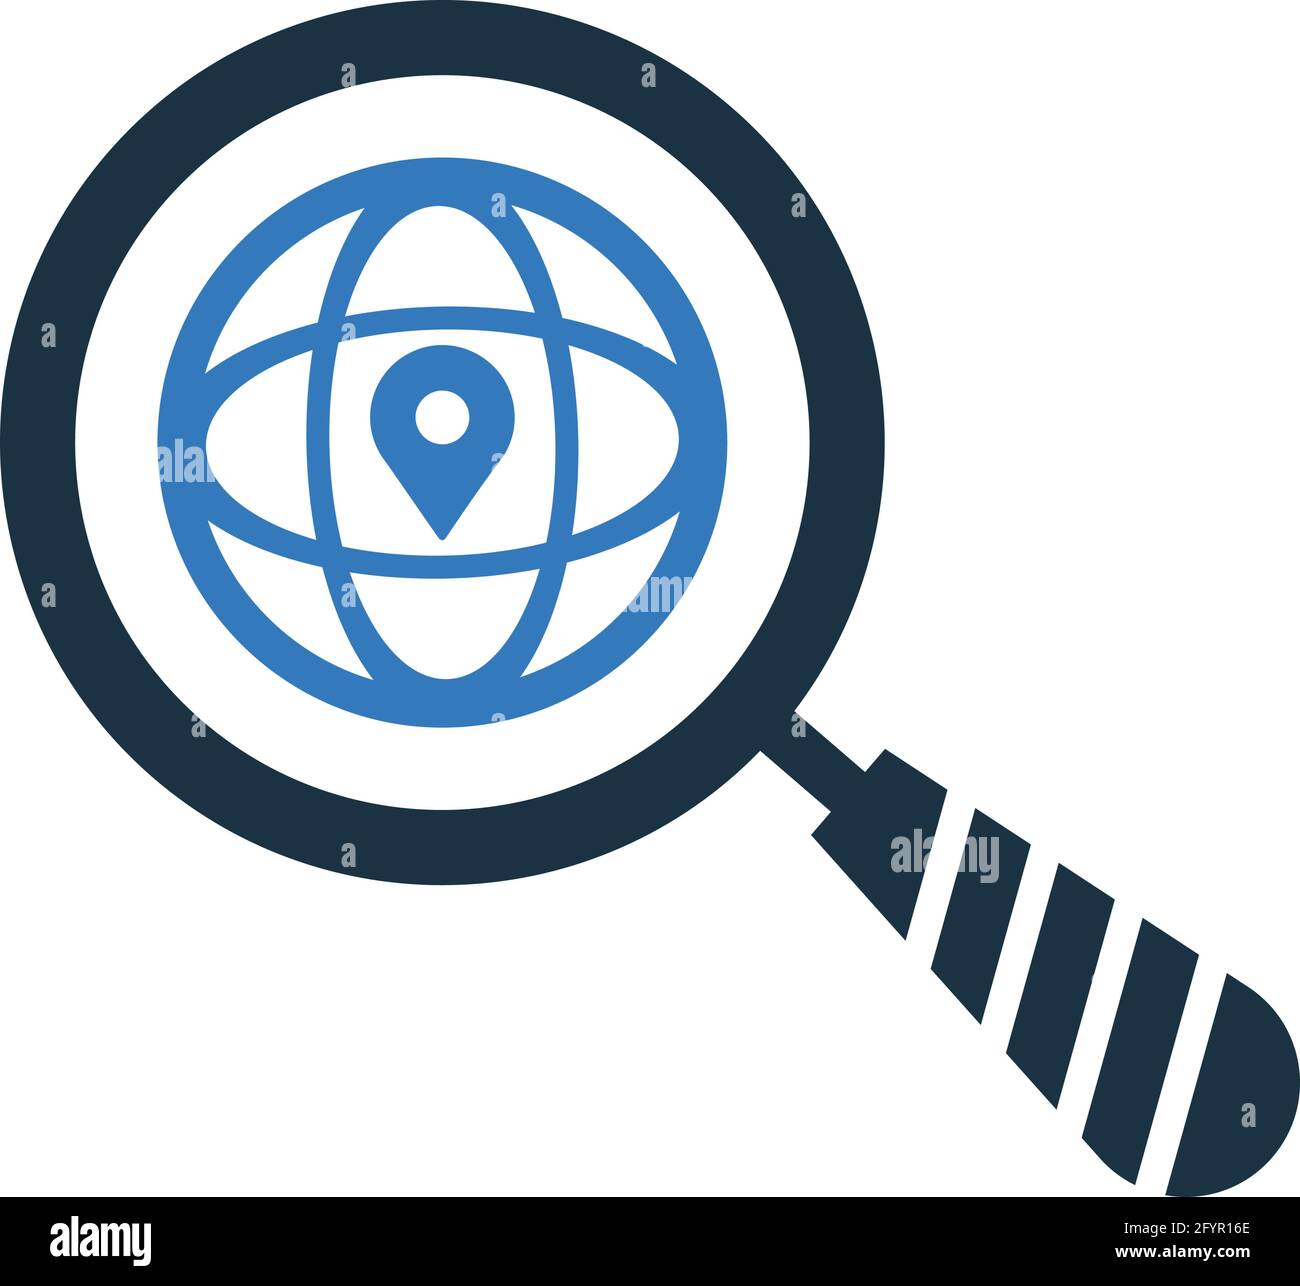 World location search icon - Perfect use for print media, web, stock images, commercial use or any kind of design project. Vector illustration. Stock Vector